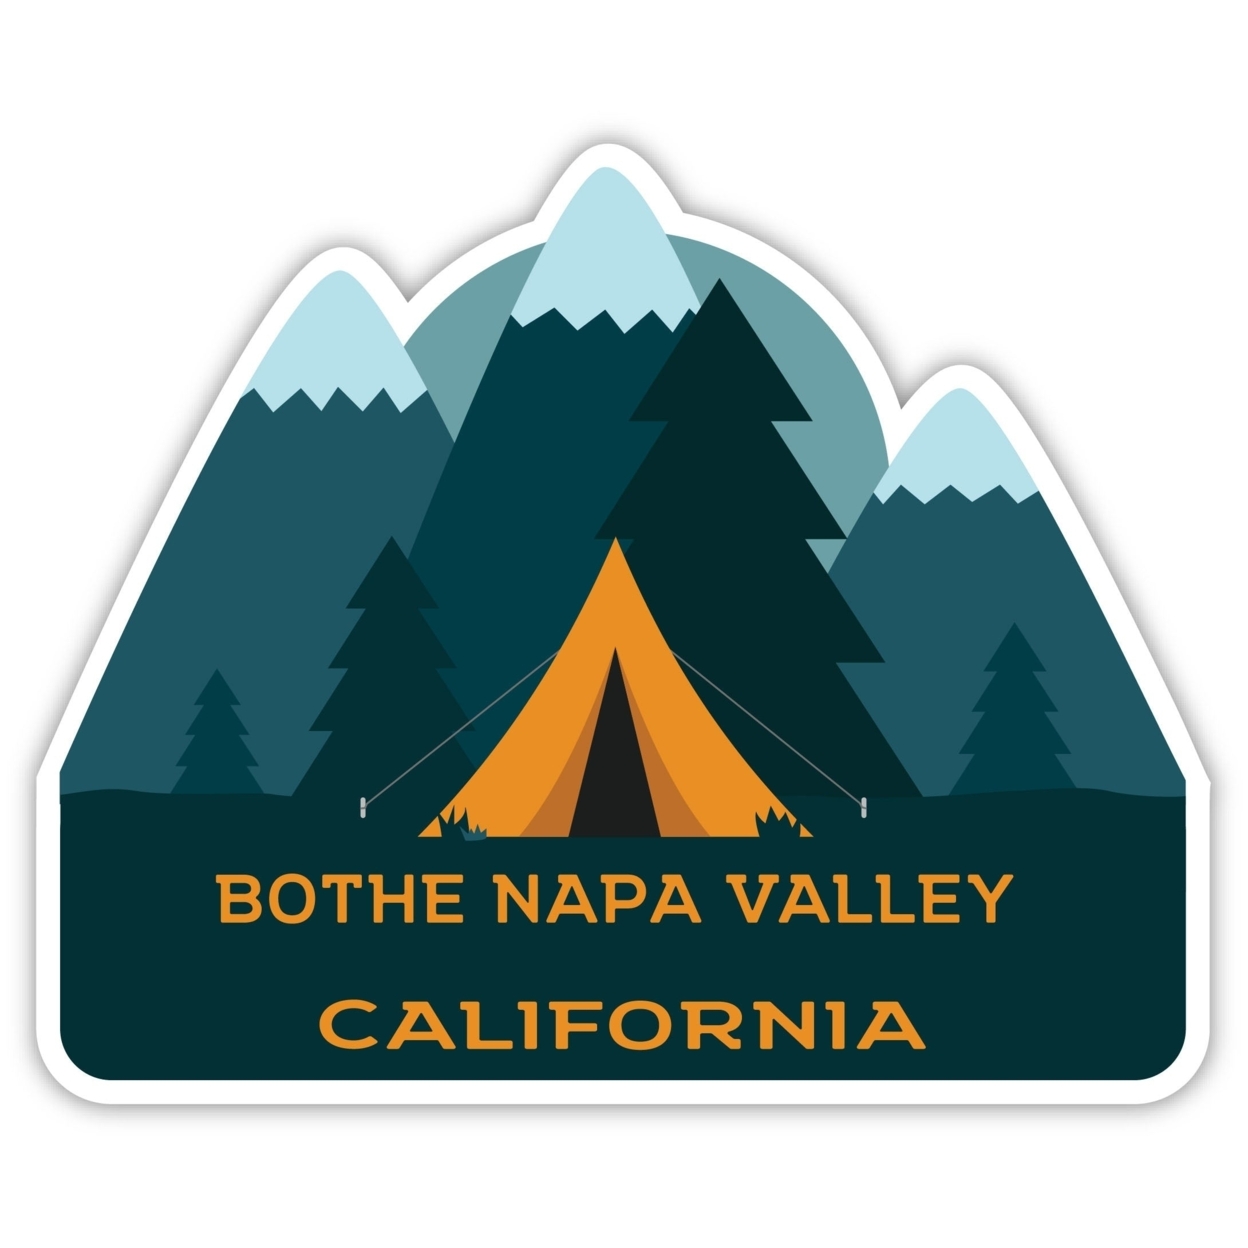 Bothe Napa Valley California Souvenir Decorative Stickers (Choose Theme And Size) - 4-Pack, 8-Inch, Tent